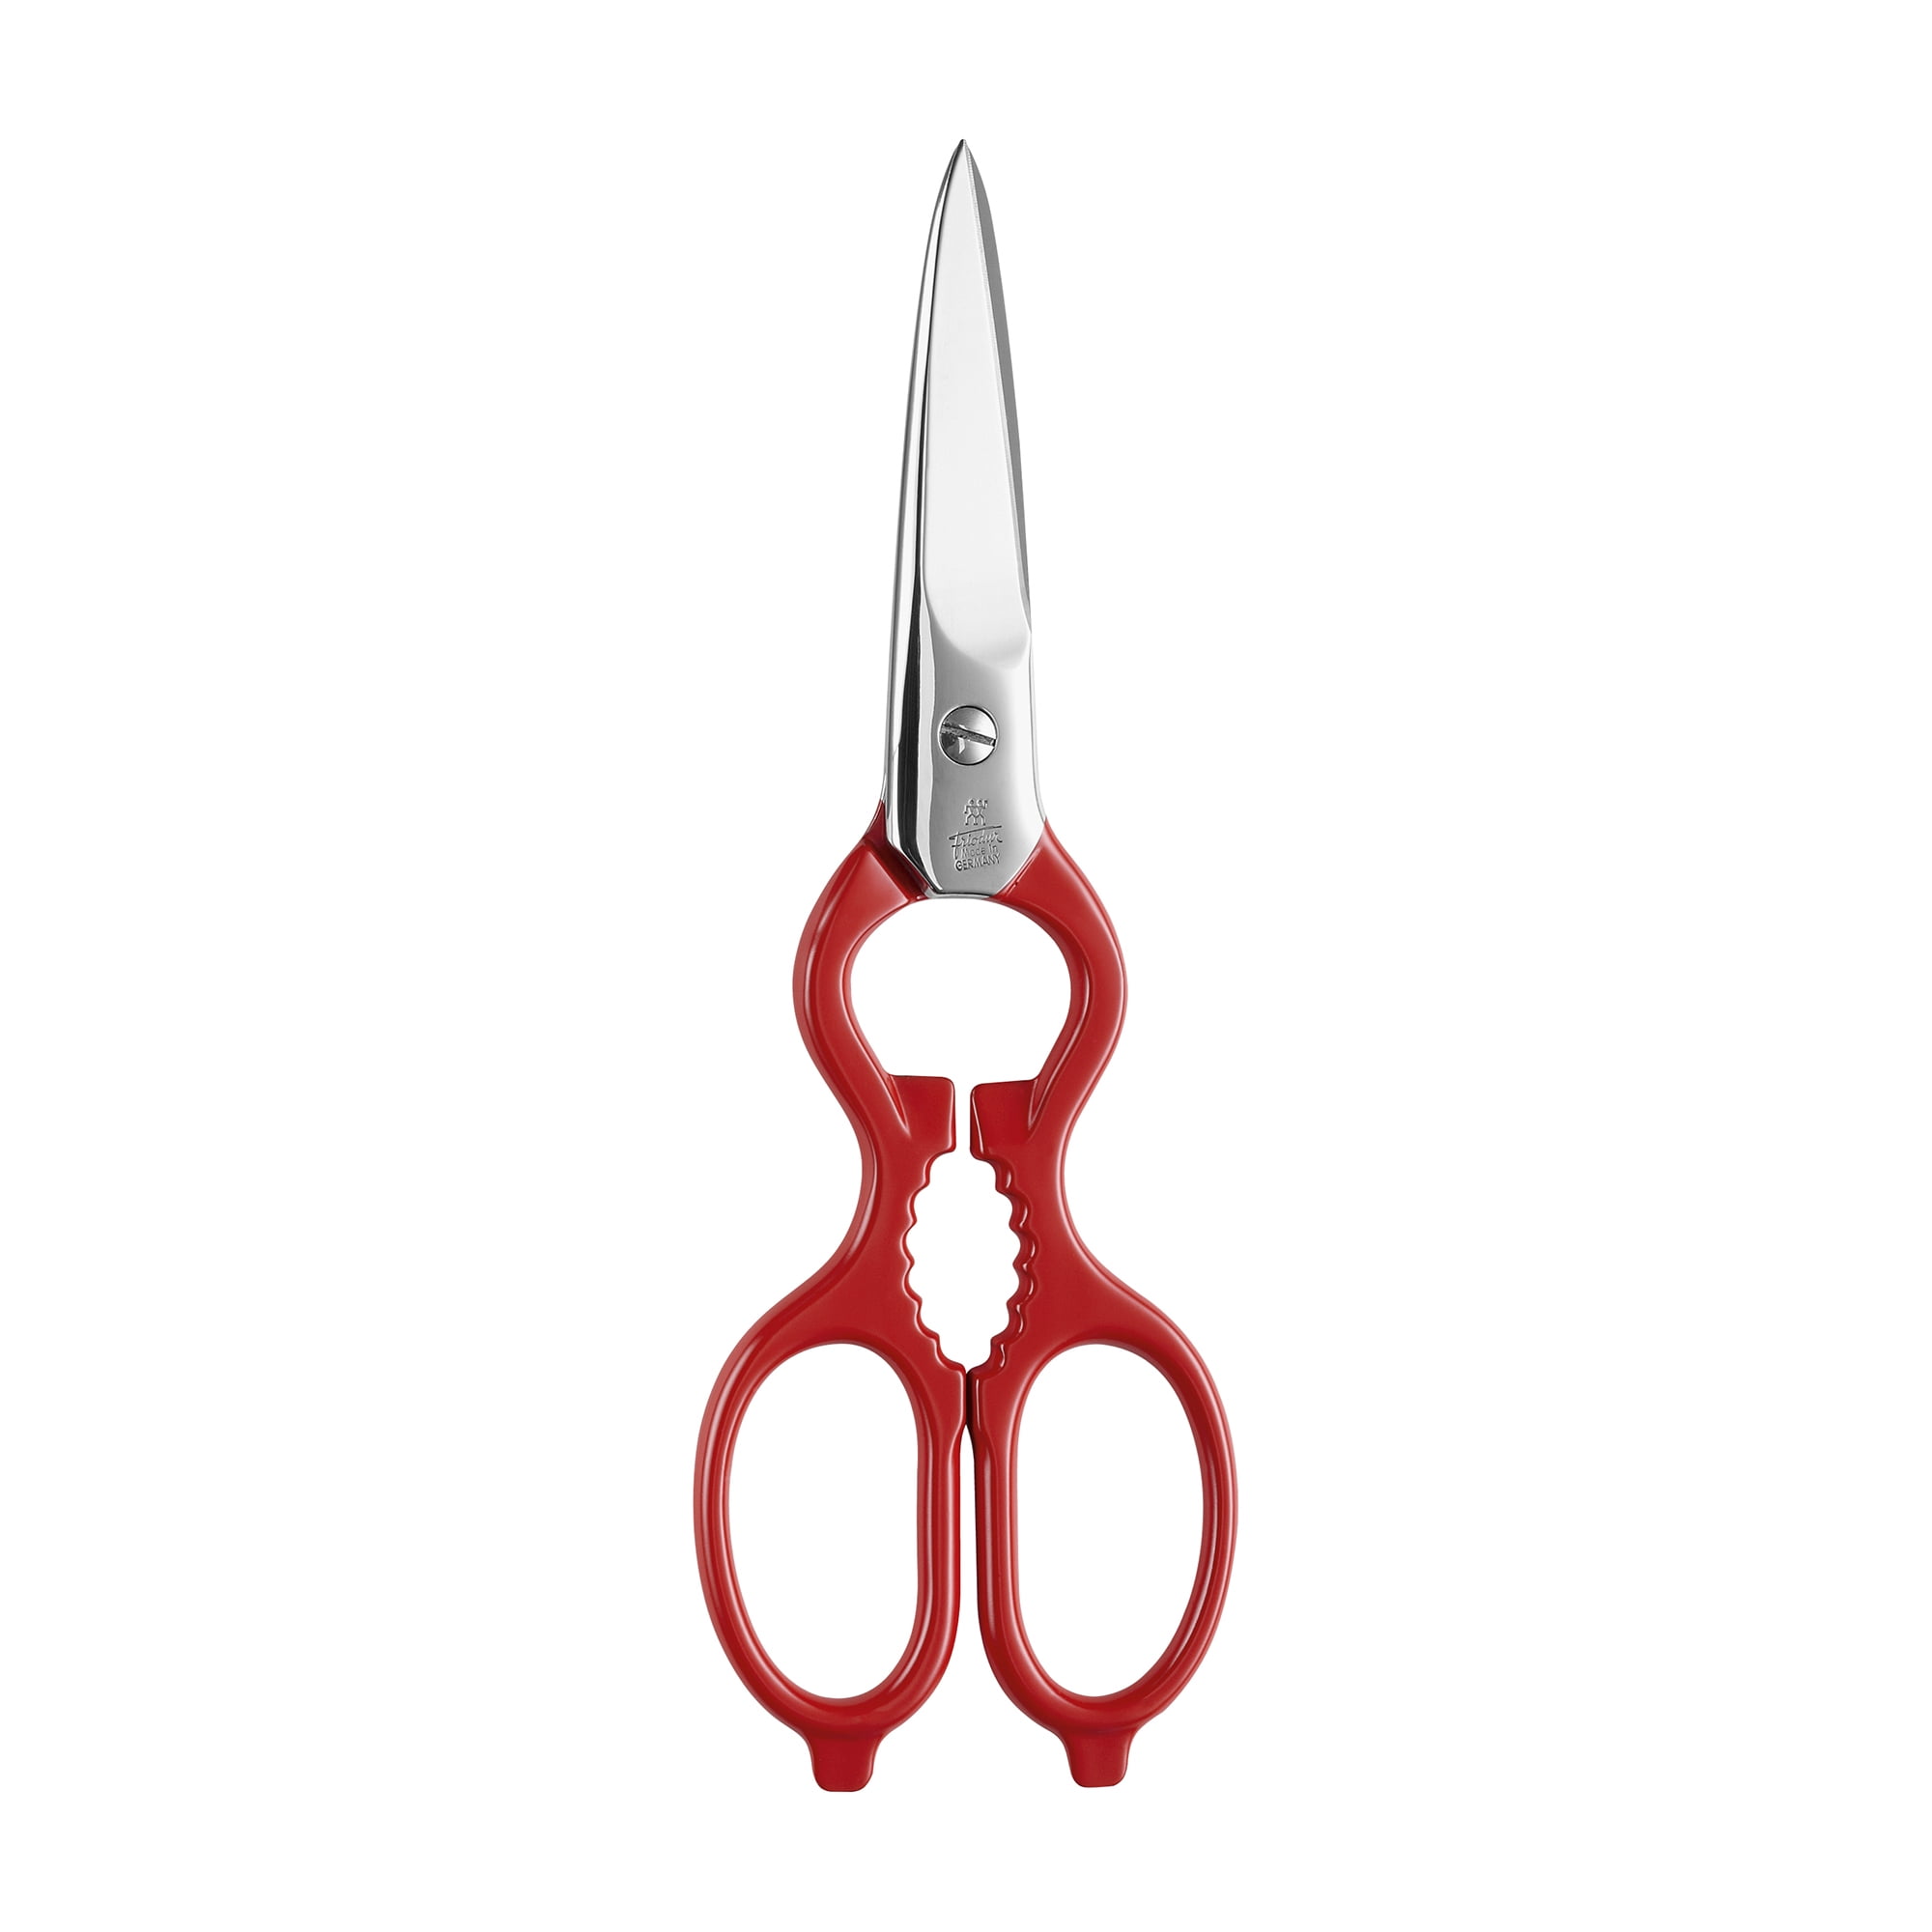 Every client is treated like family. Finding the ZWILLING SHEARS